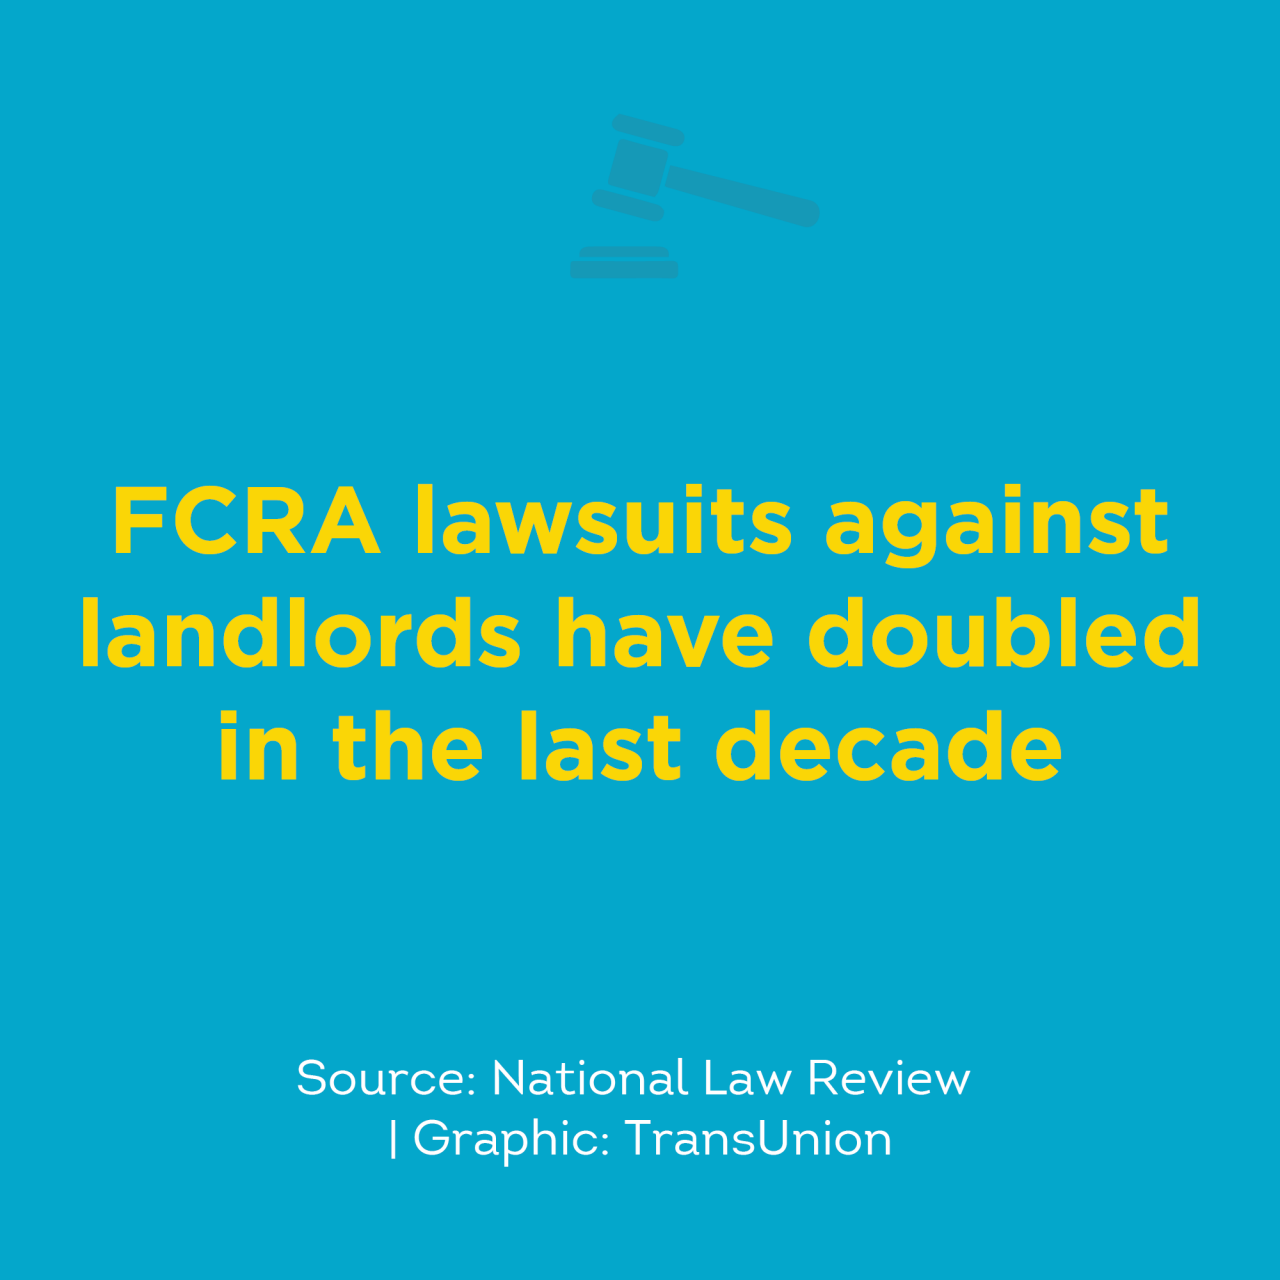 FCRA lawsuits have doubled over the last decade